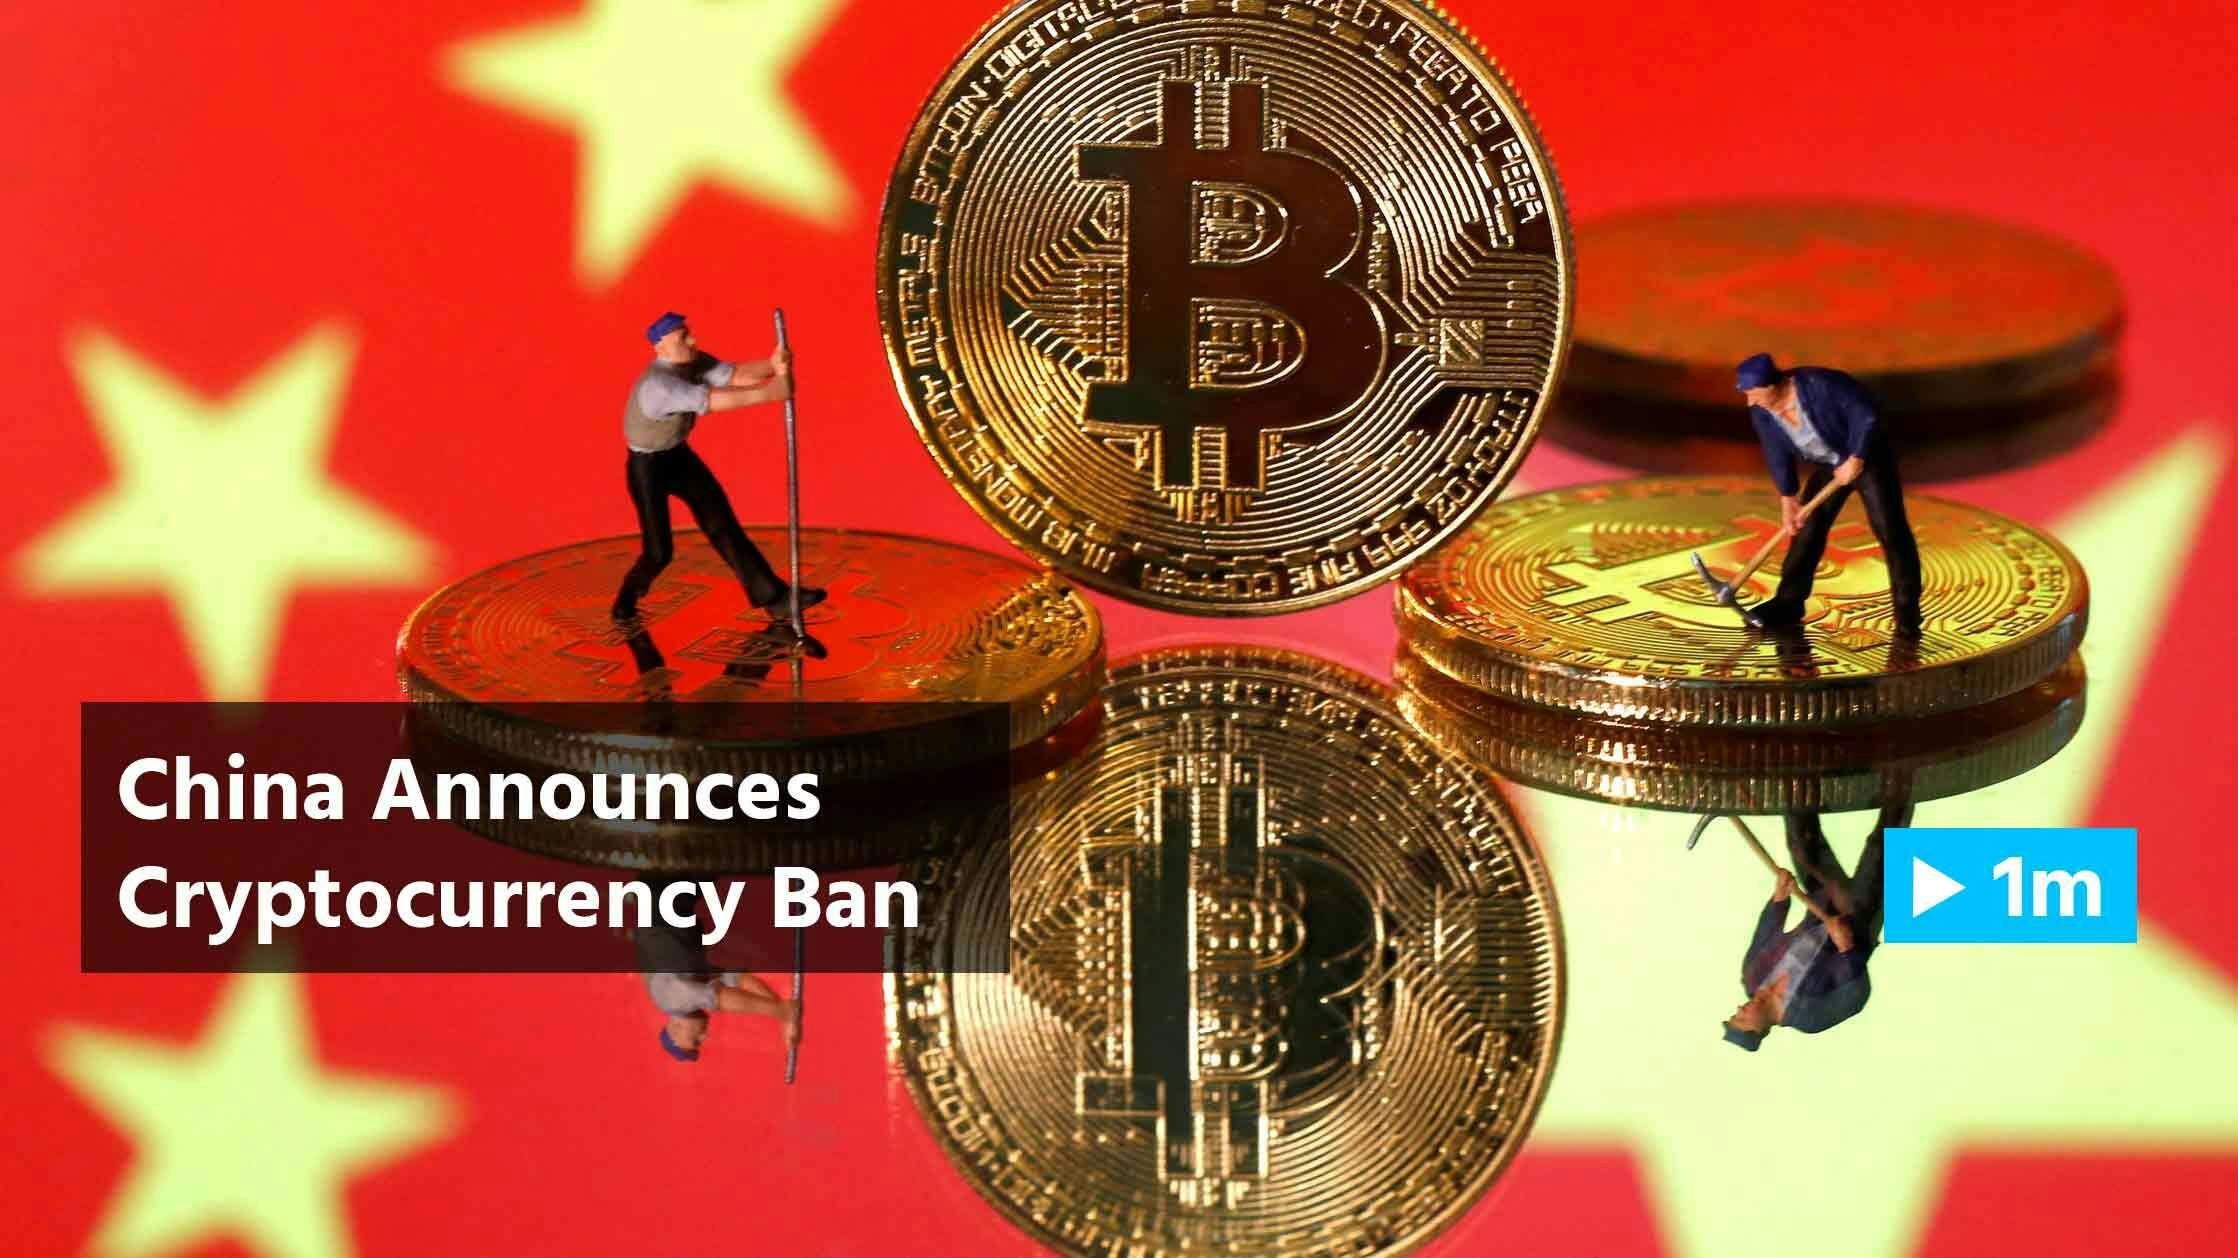 Reuters Report: China announces cryptocurrency ban